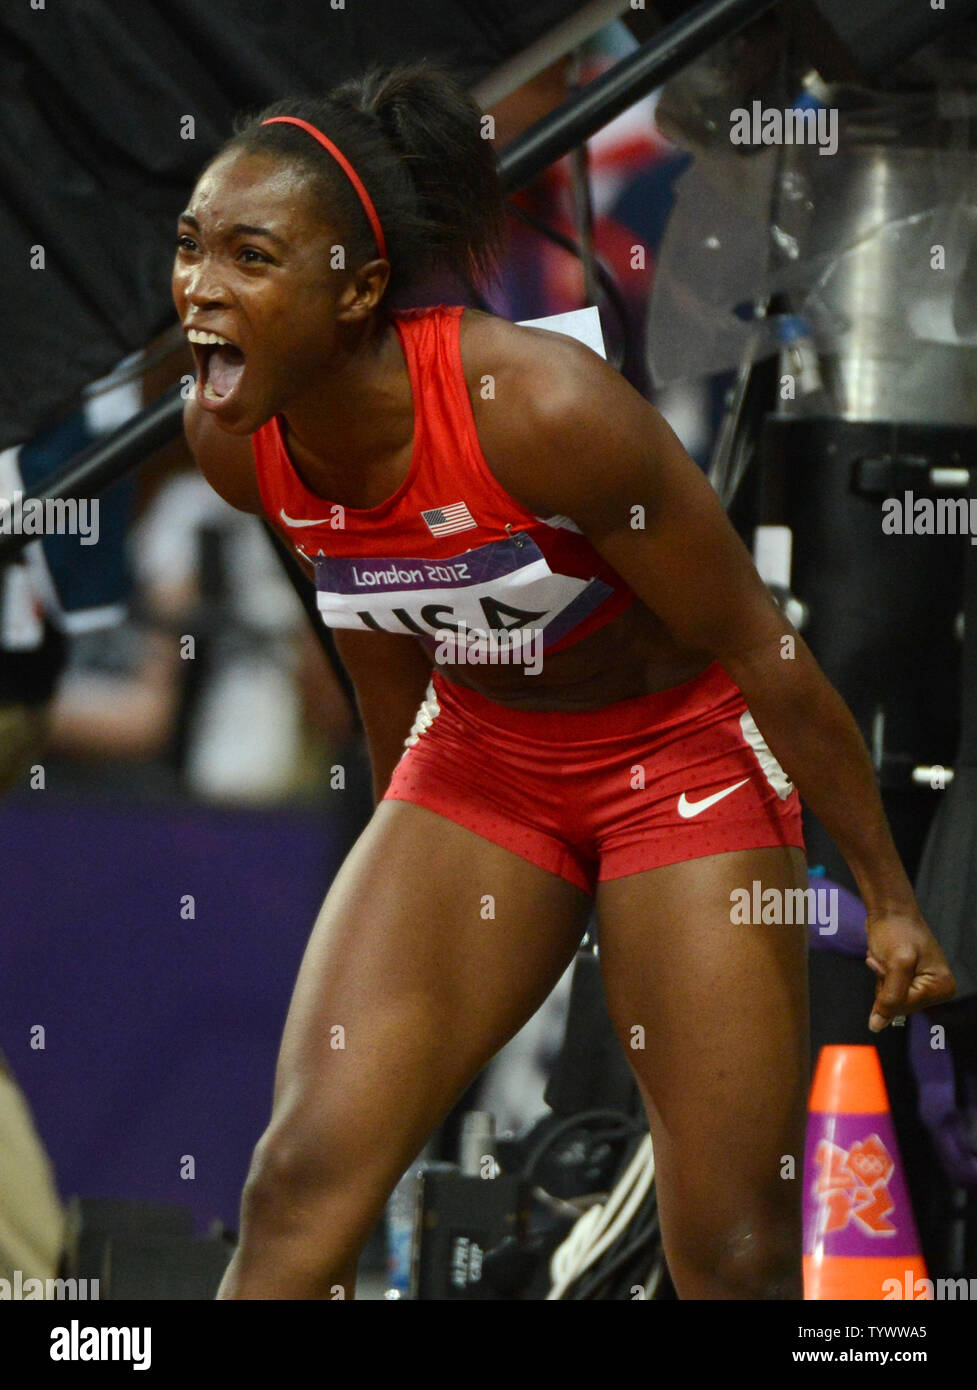 Tianna Madison of the USA celebrates winning the gold medal and setting a new world record in the Women's 4x100M Relay at the London 2012 Summer Olympics on August 10, 2012 in London.    UPI/Terry Schmitt Stock Photo